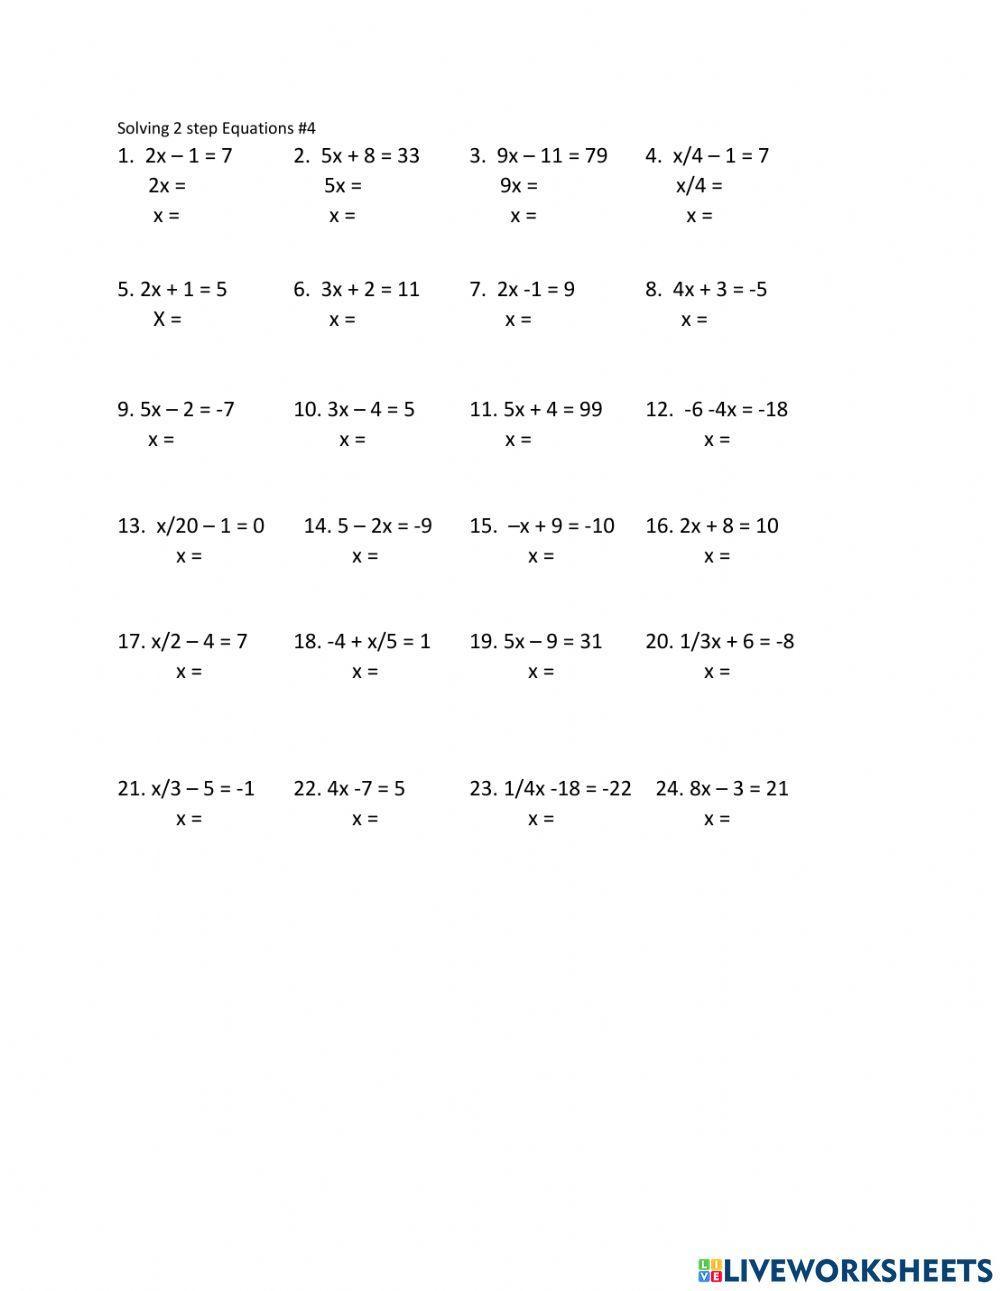 Solving 2 step equations -4